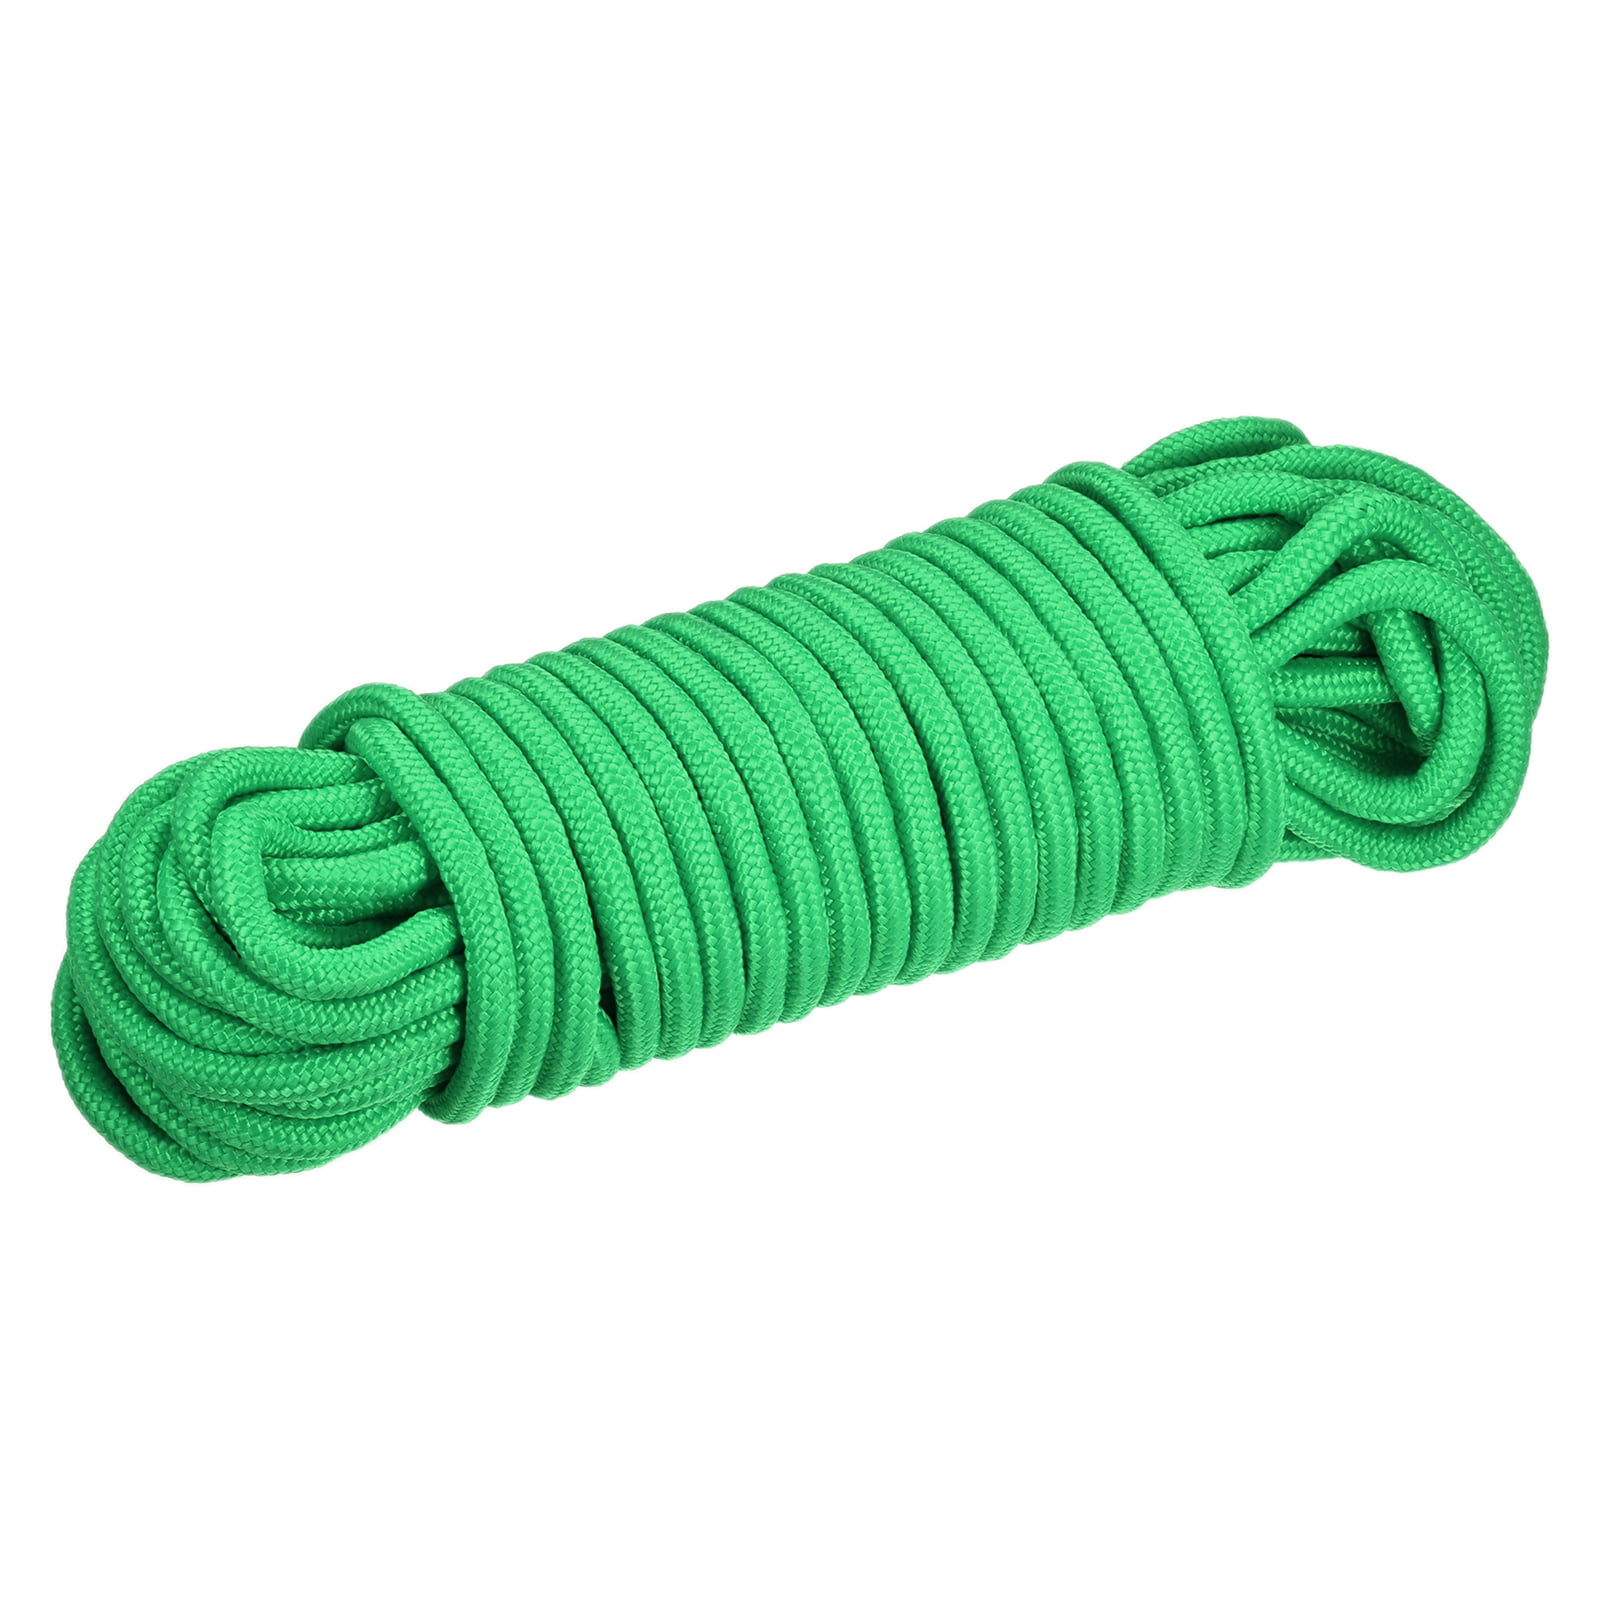 Bright Green 3/8" x 100 ft.of Hollow Braid Polypropylene Rope 